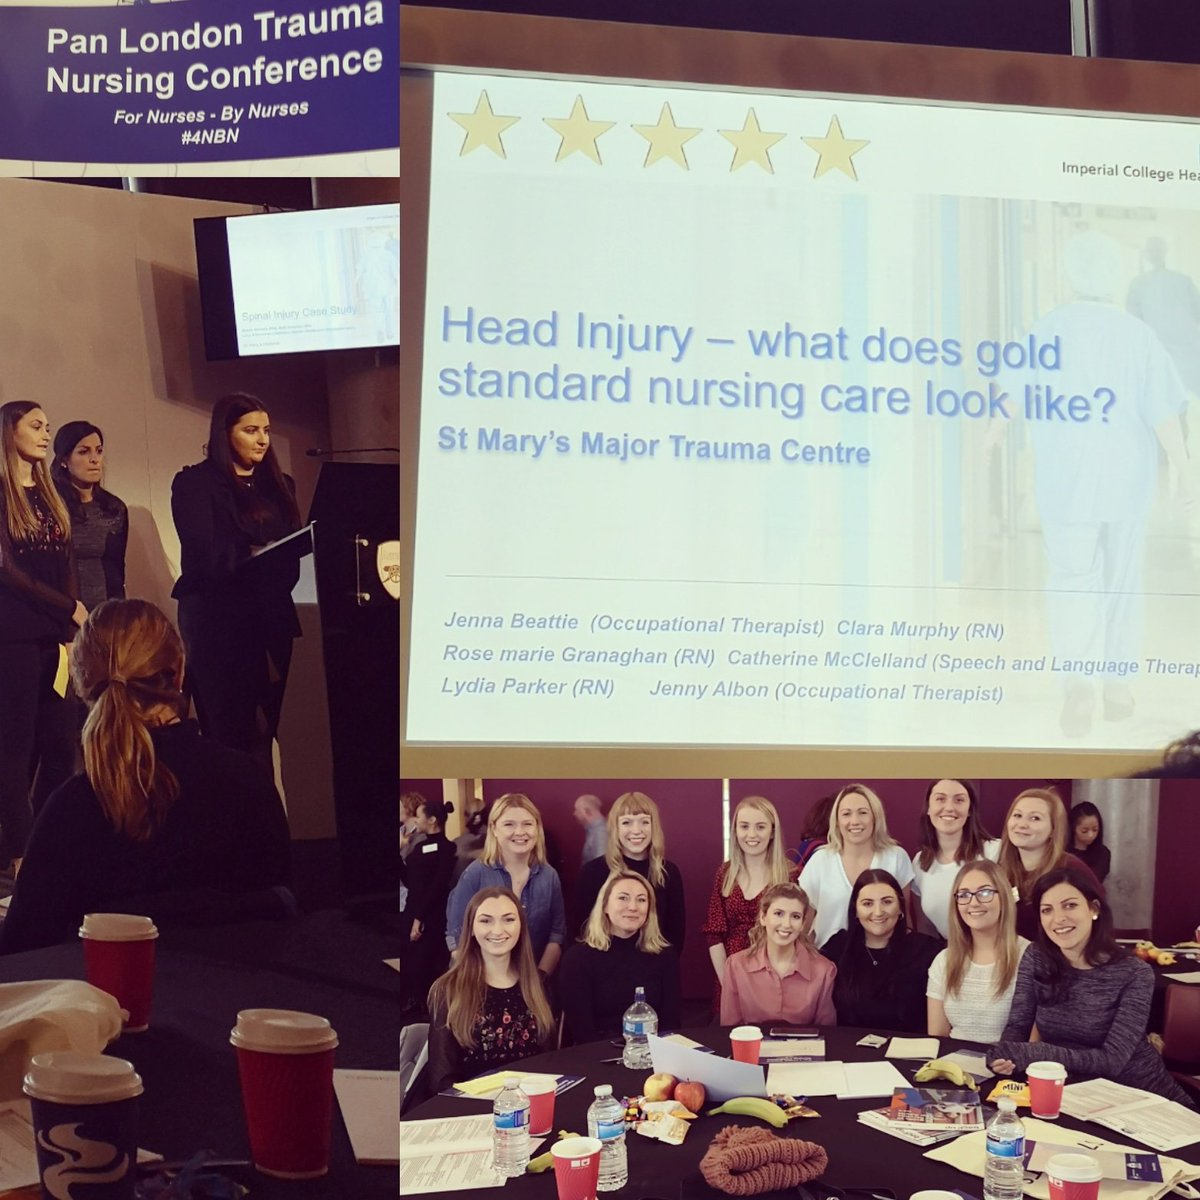 So proud of the major trauma team at at Mary's sharing their knowledge of gold standard care from a nursing and therapy point of view ✨✨✨ #imperialnhs #nursingconference #nurses #thearpy #traumacare #networkingconference